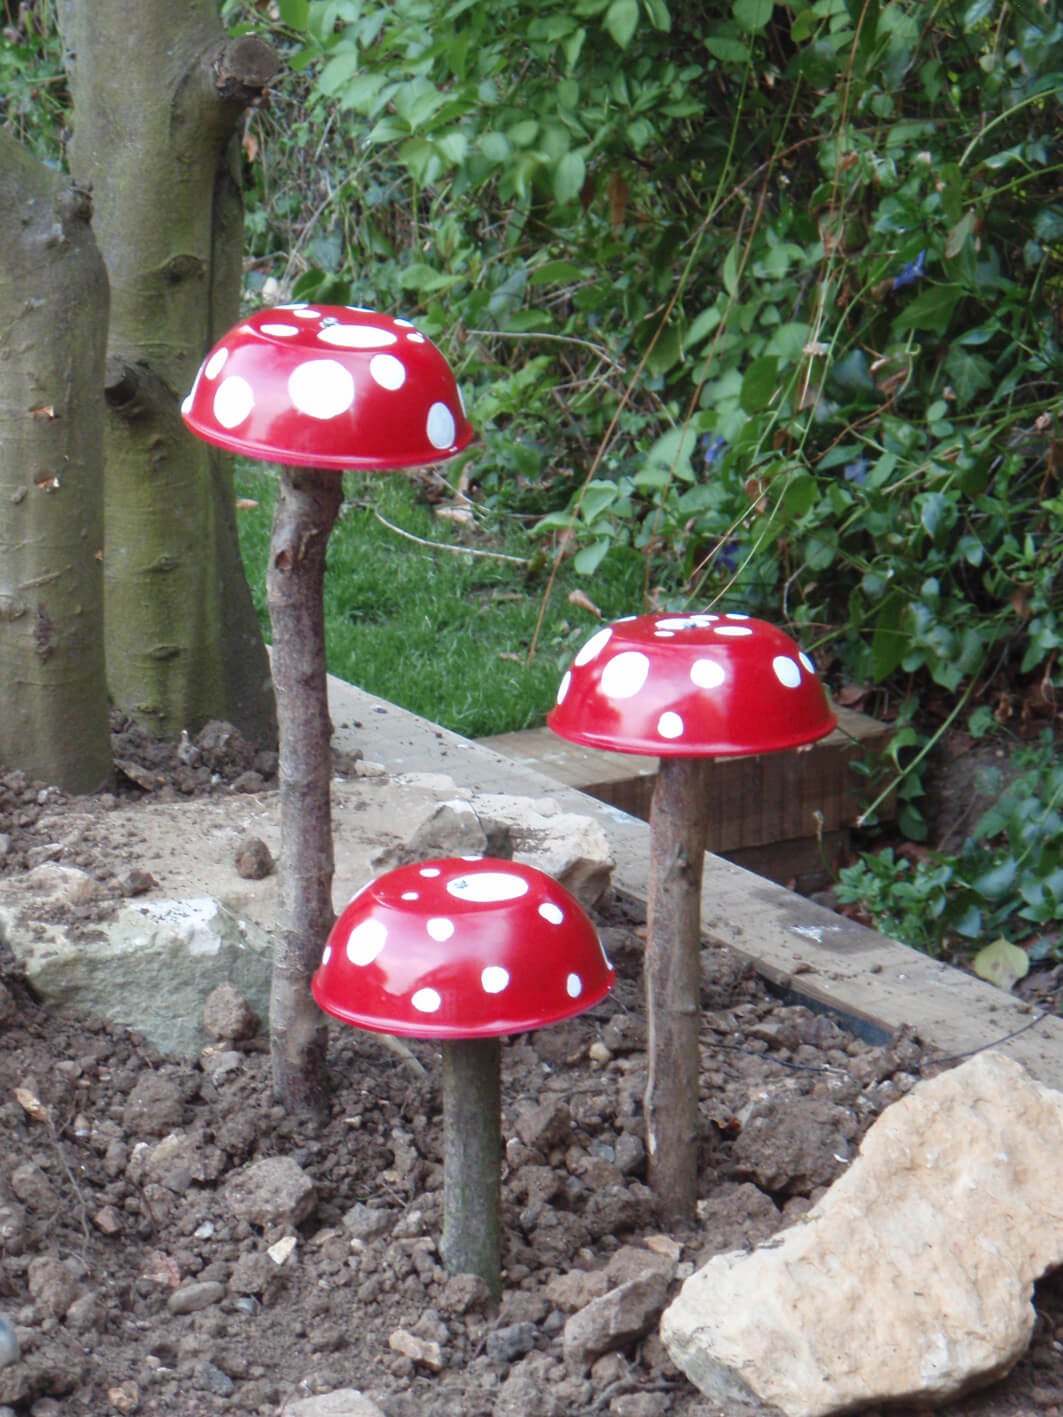 Affordable and Simple Garden Art Mushrooms